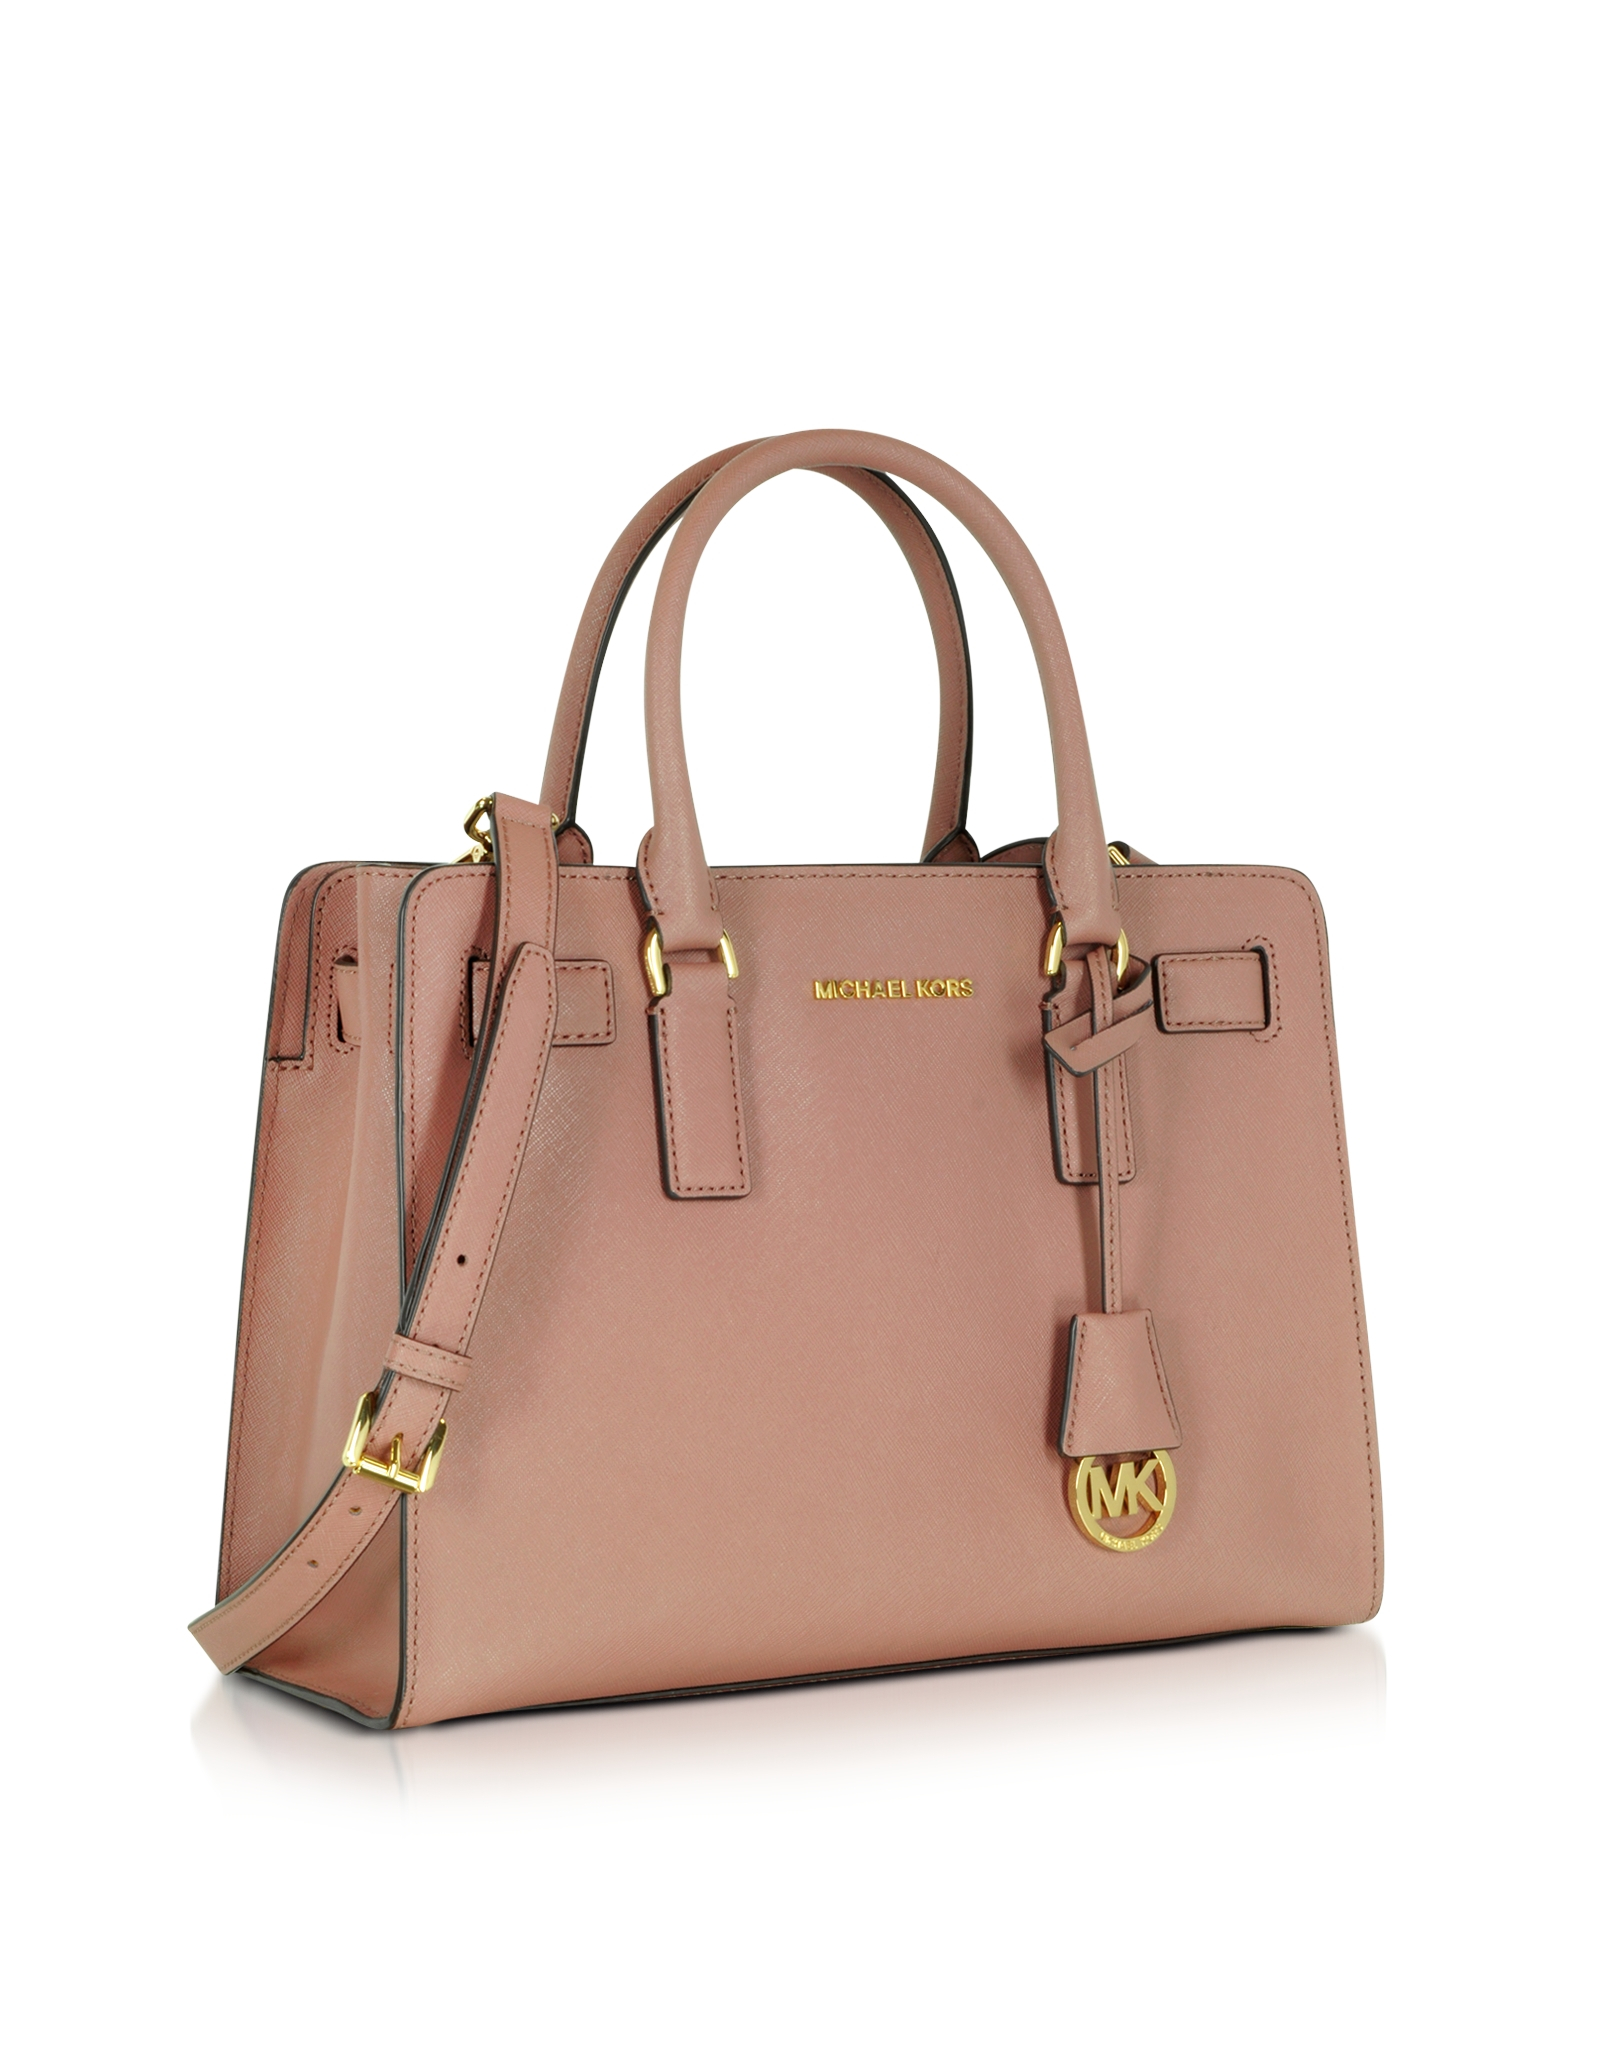 buy > michael kors dusty pink bag > Up to 75% OFF > Free shipping